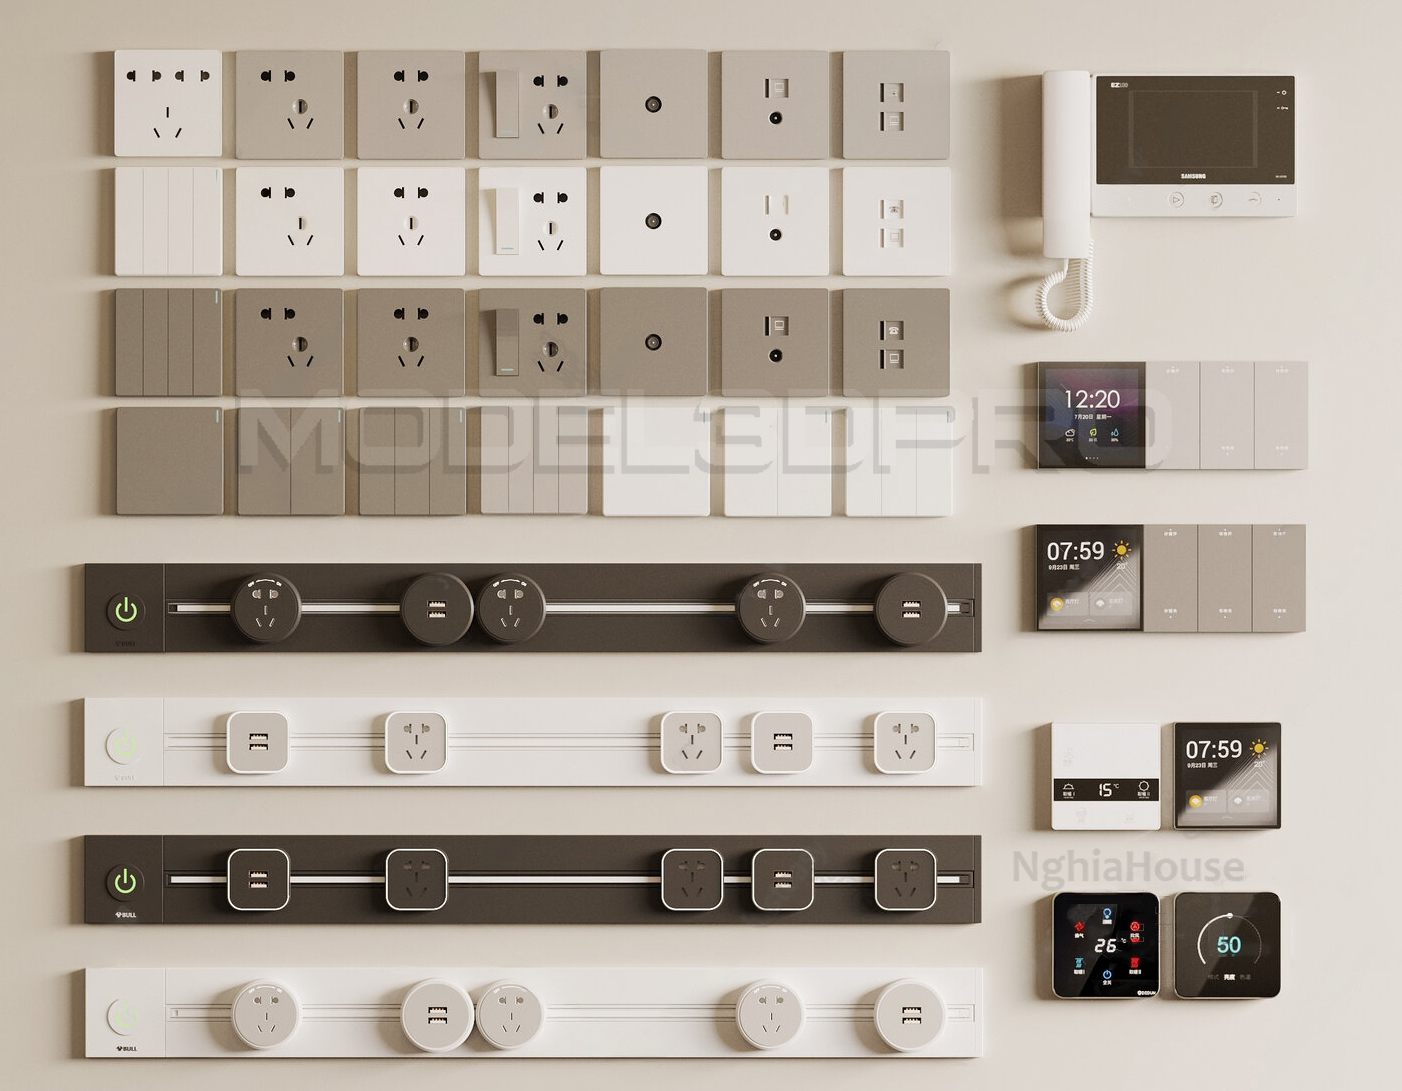 Free Sketchup Electrical Outlets And Switches Models Download